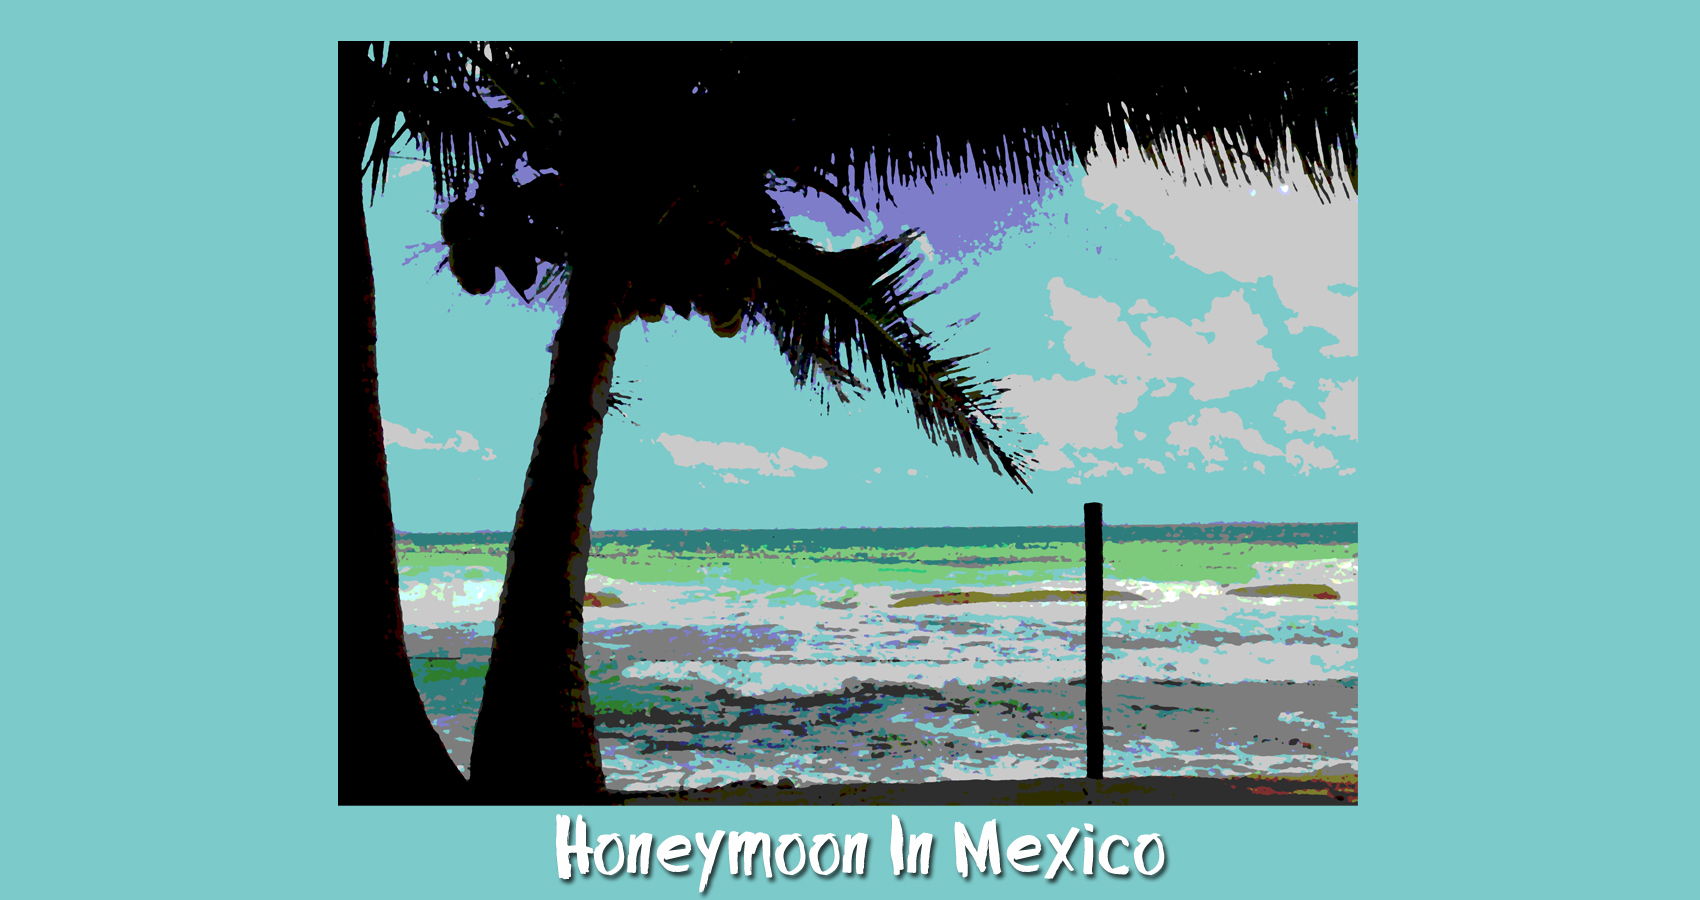 Honeymoon In Mexcio by Thomas Park at Spillwords.com